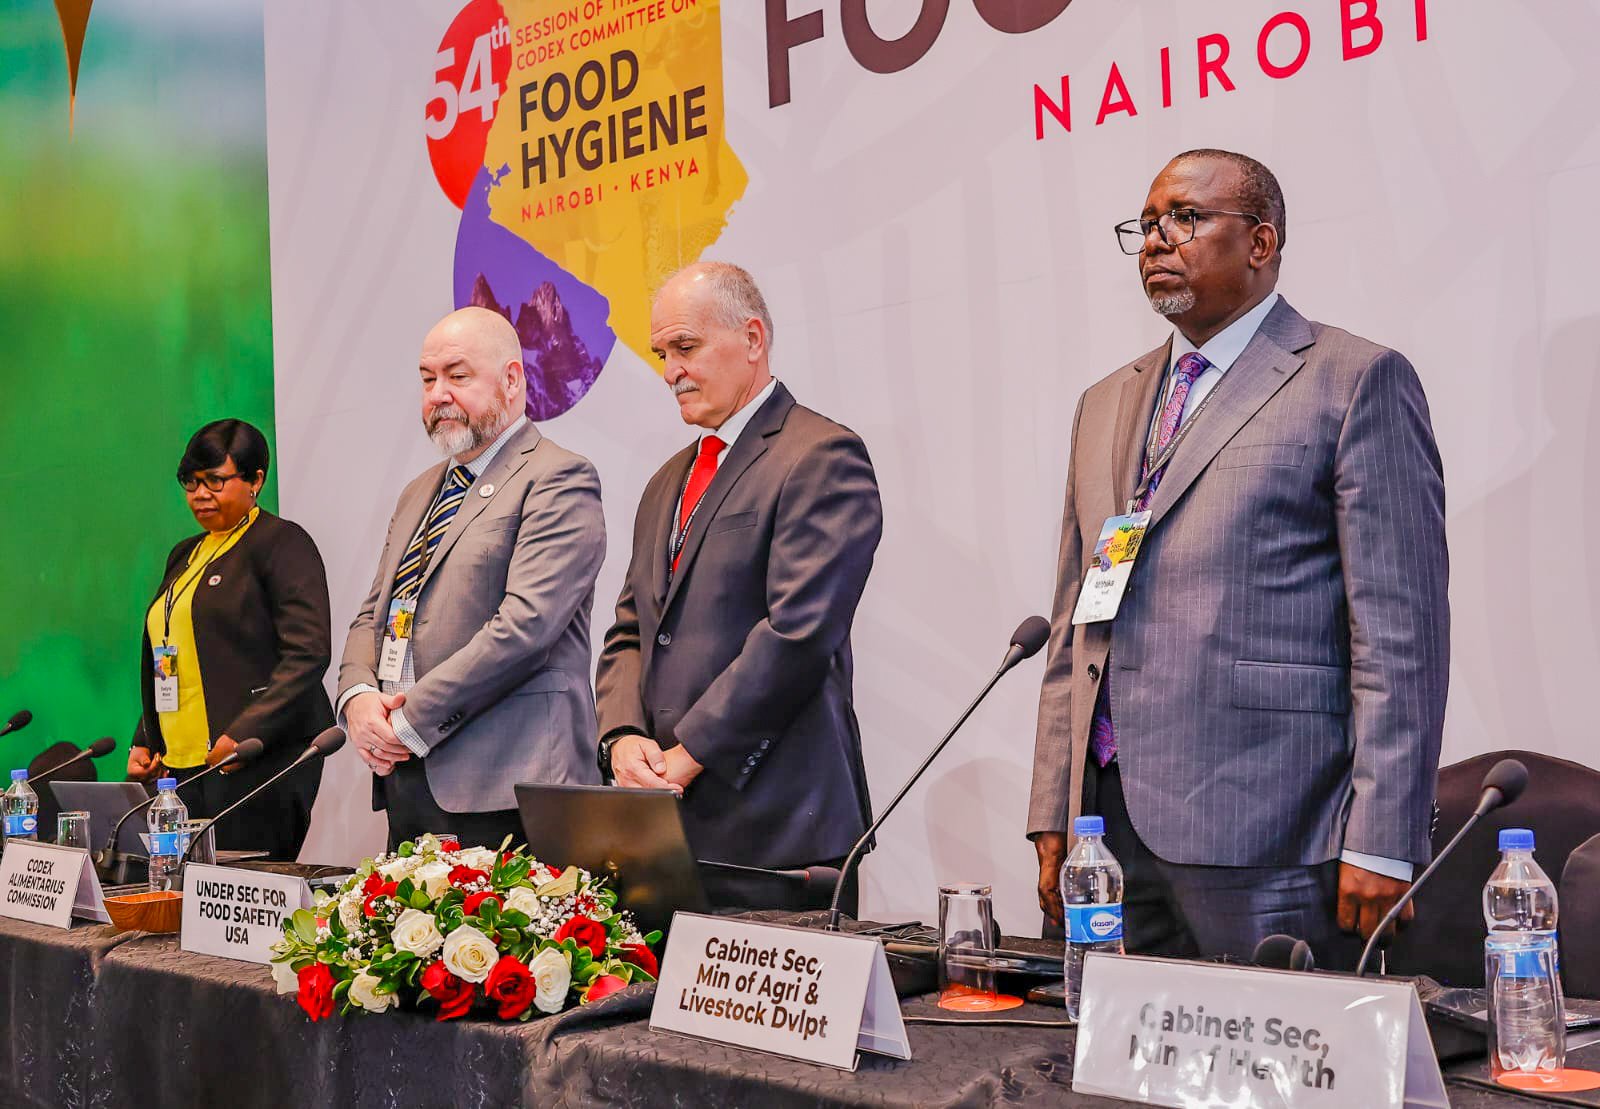 54th CODEX Committee on Food Hygiene Opens In Kenya for the Second Time